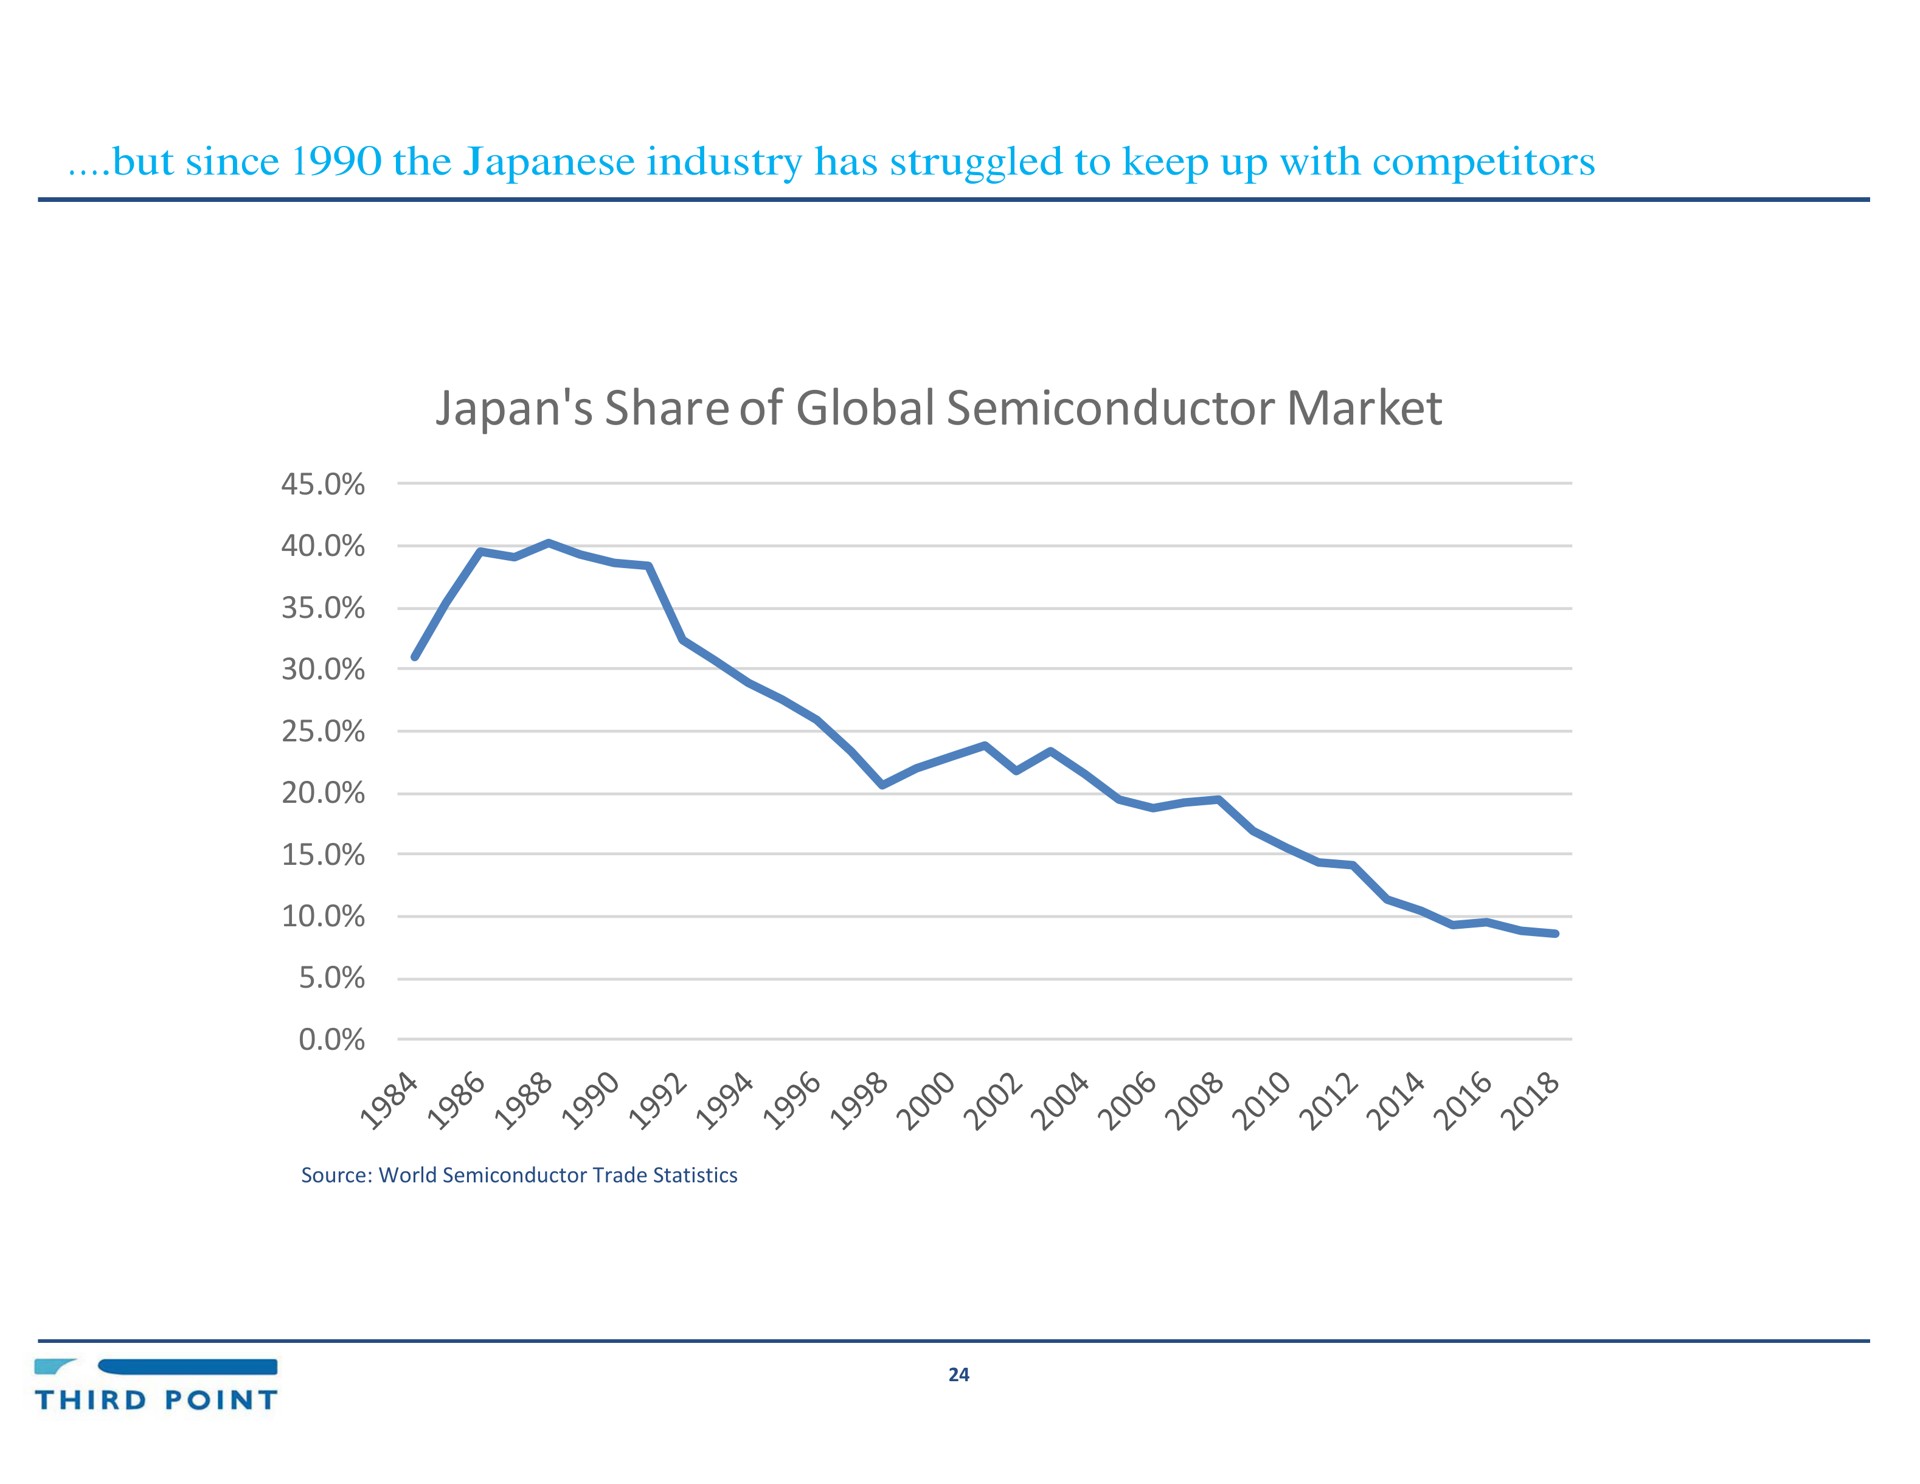 but since the industry has struggled to keep up with competitors japan share of global semiconductor market fip | Third Point Management